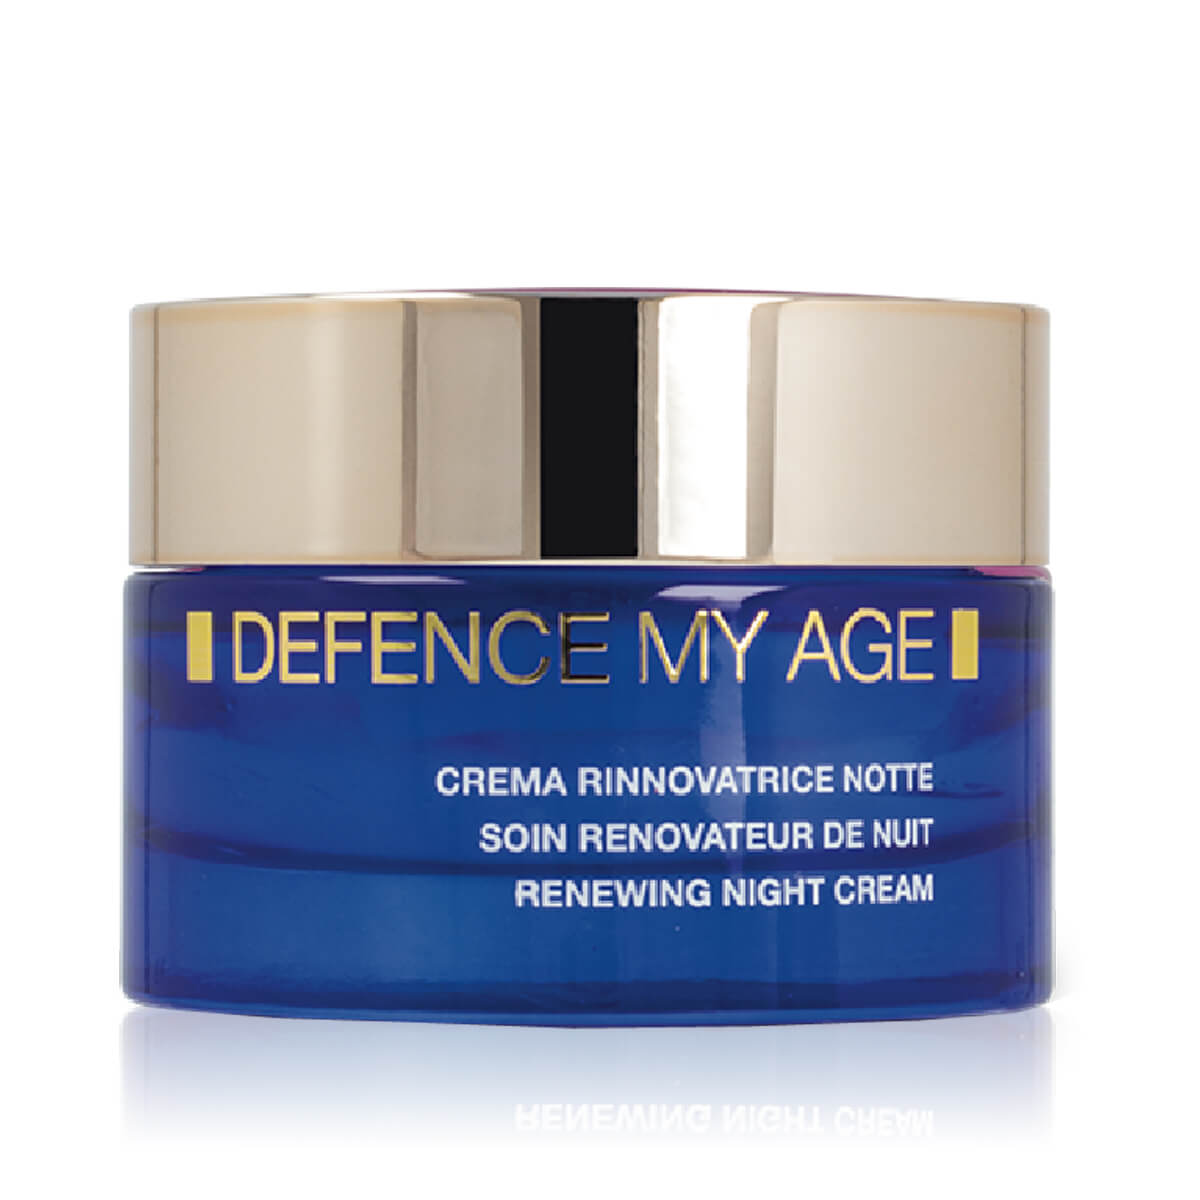 Defence My Age Crema Rinnovatrice Notte